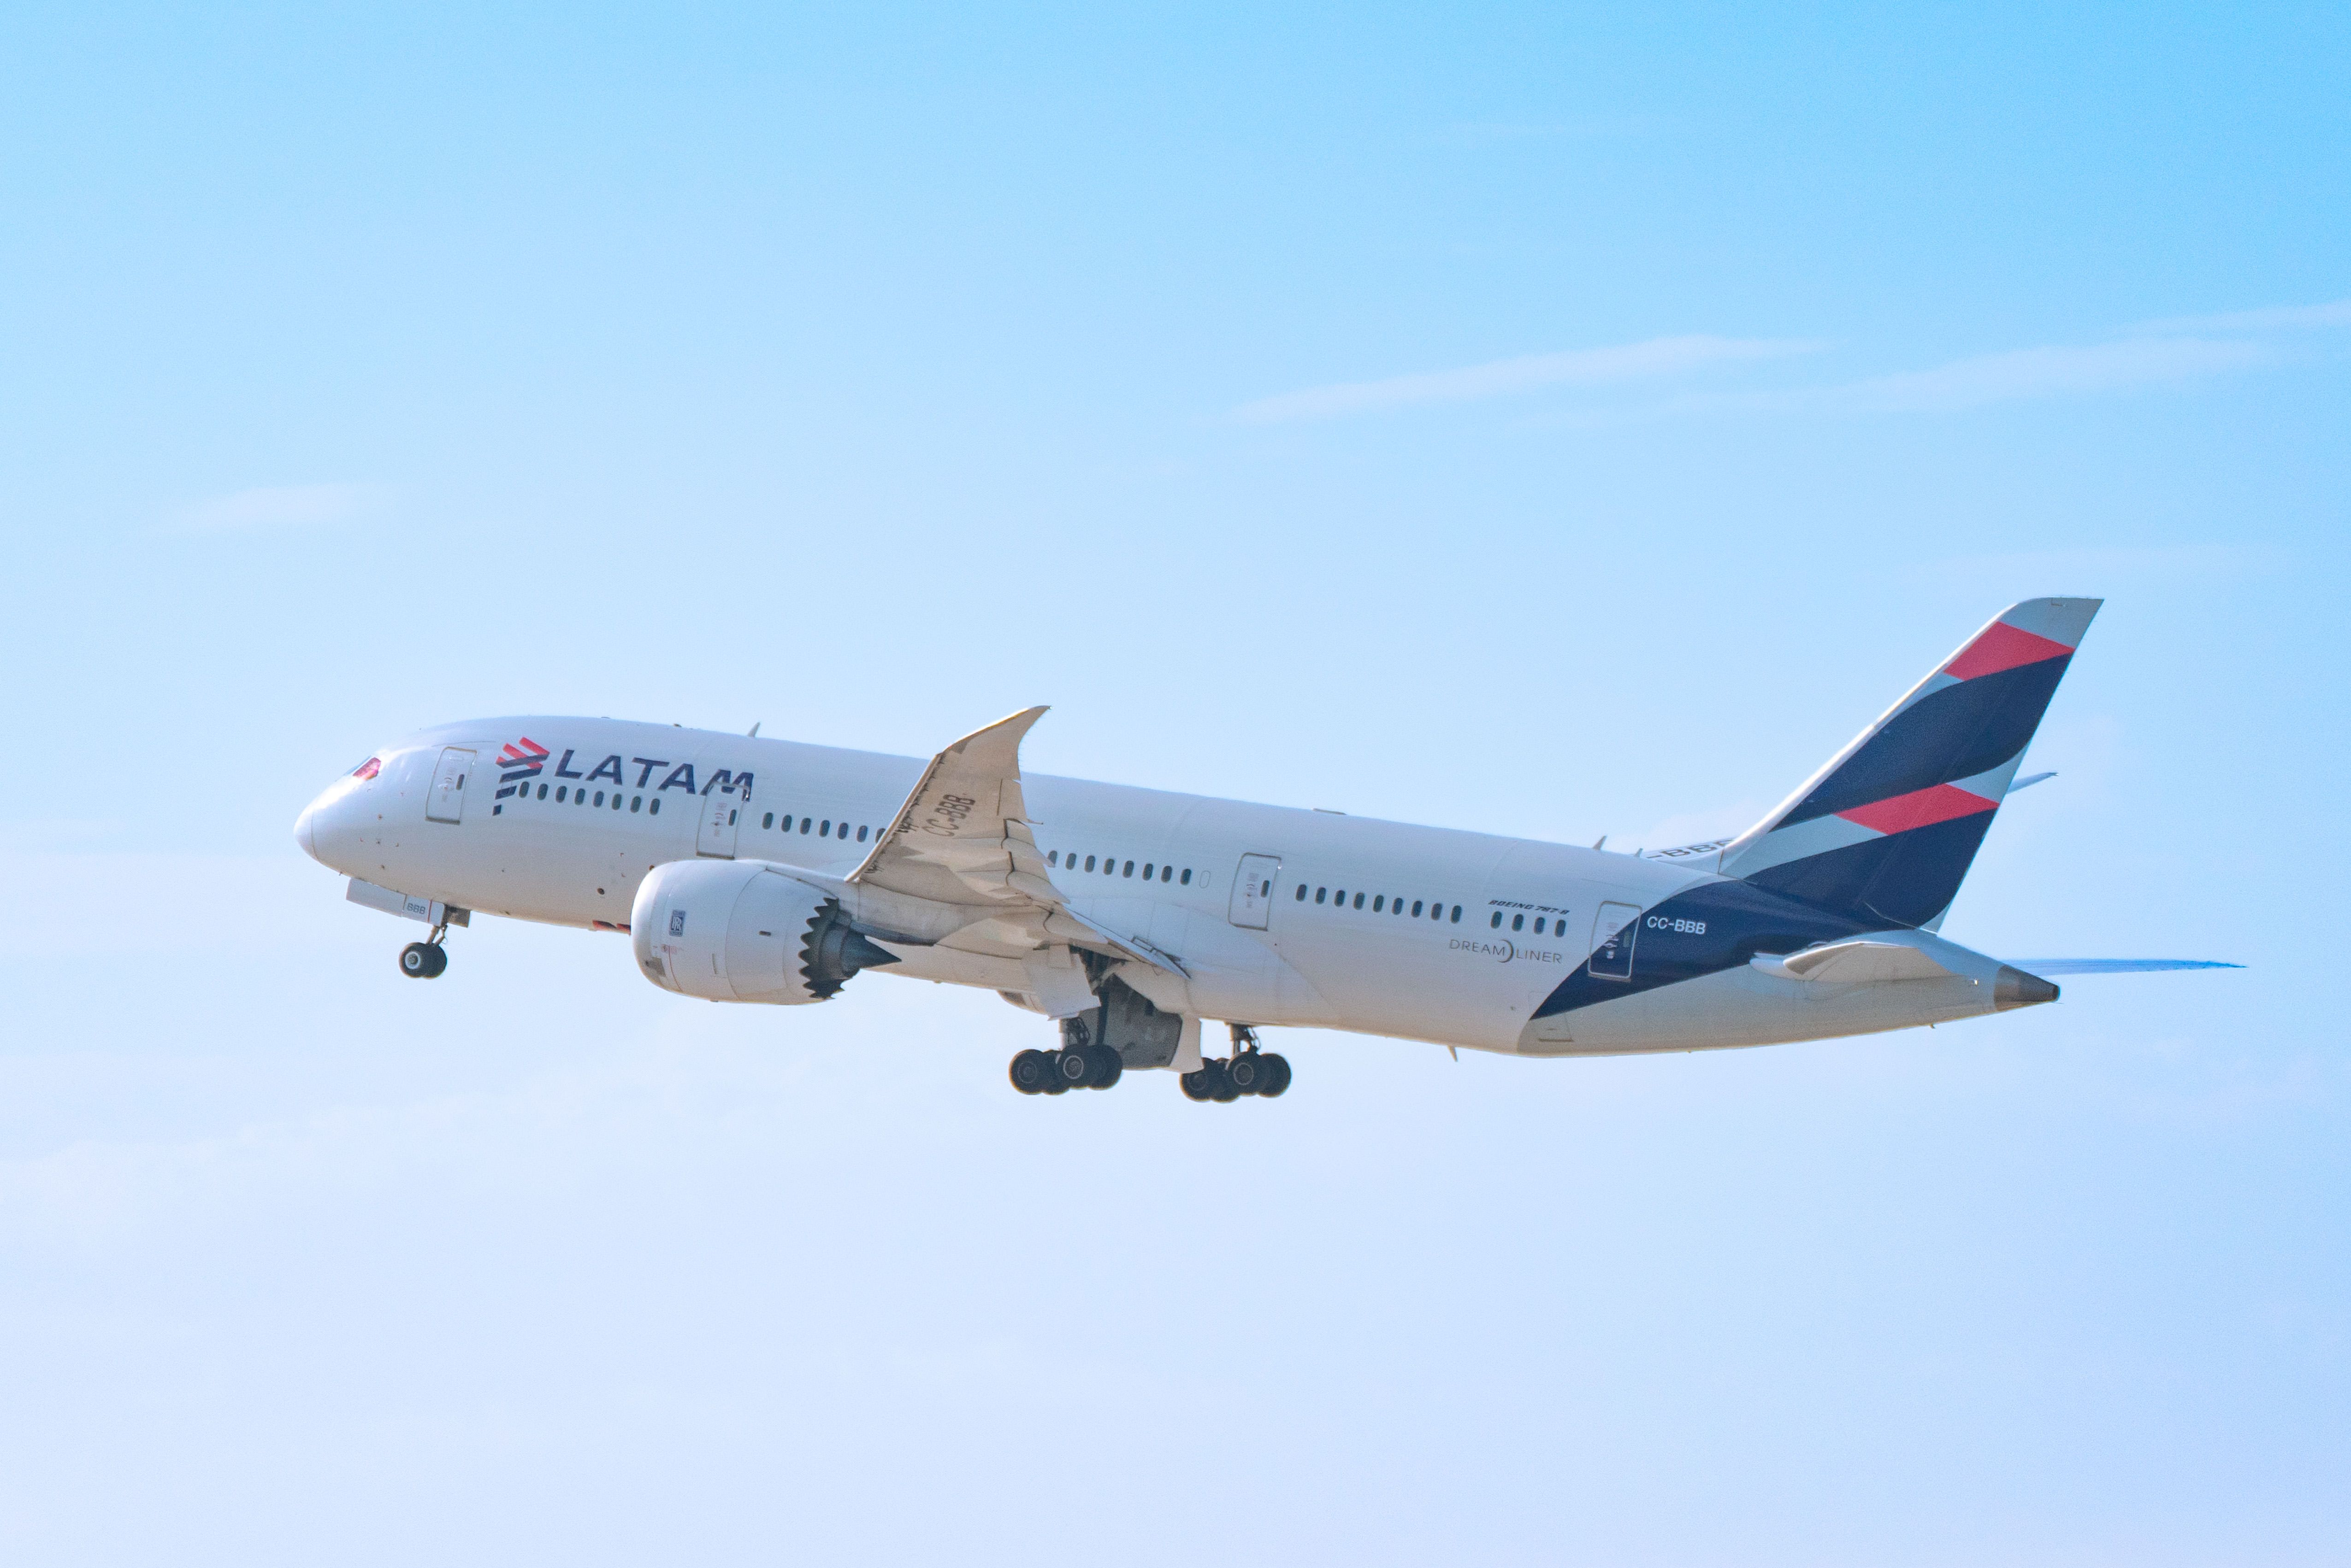 GettyImages-1242219834 - LATAM 'LAN Chile' Airlines Boeing 787-8 takes off from Los Angeles international Airport on July 30, 2022 in Los Angeles, California